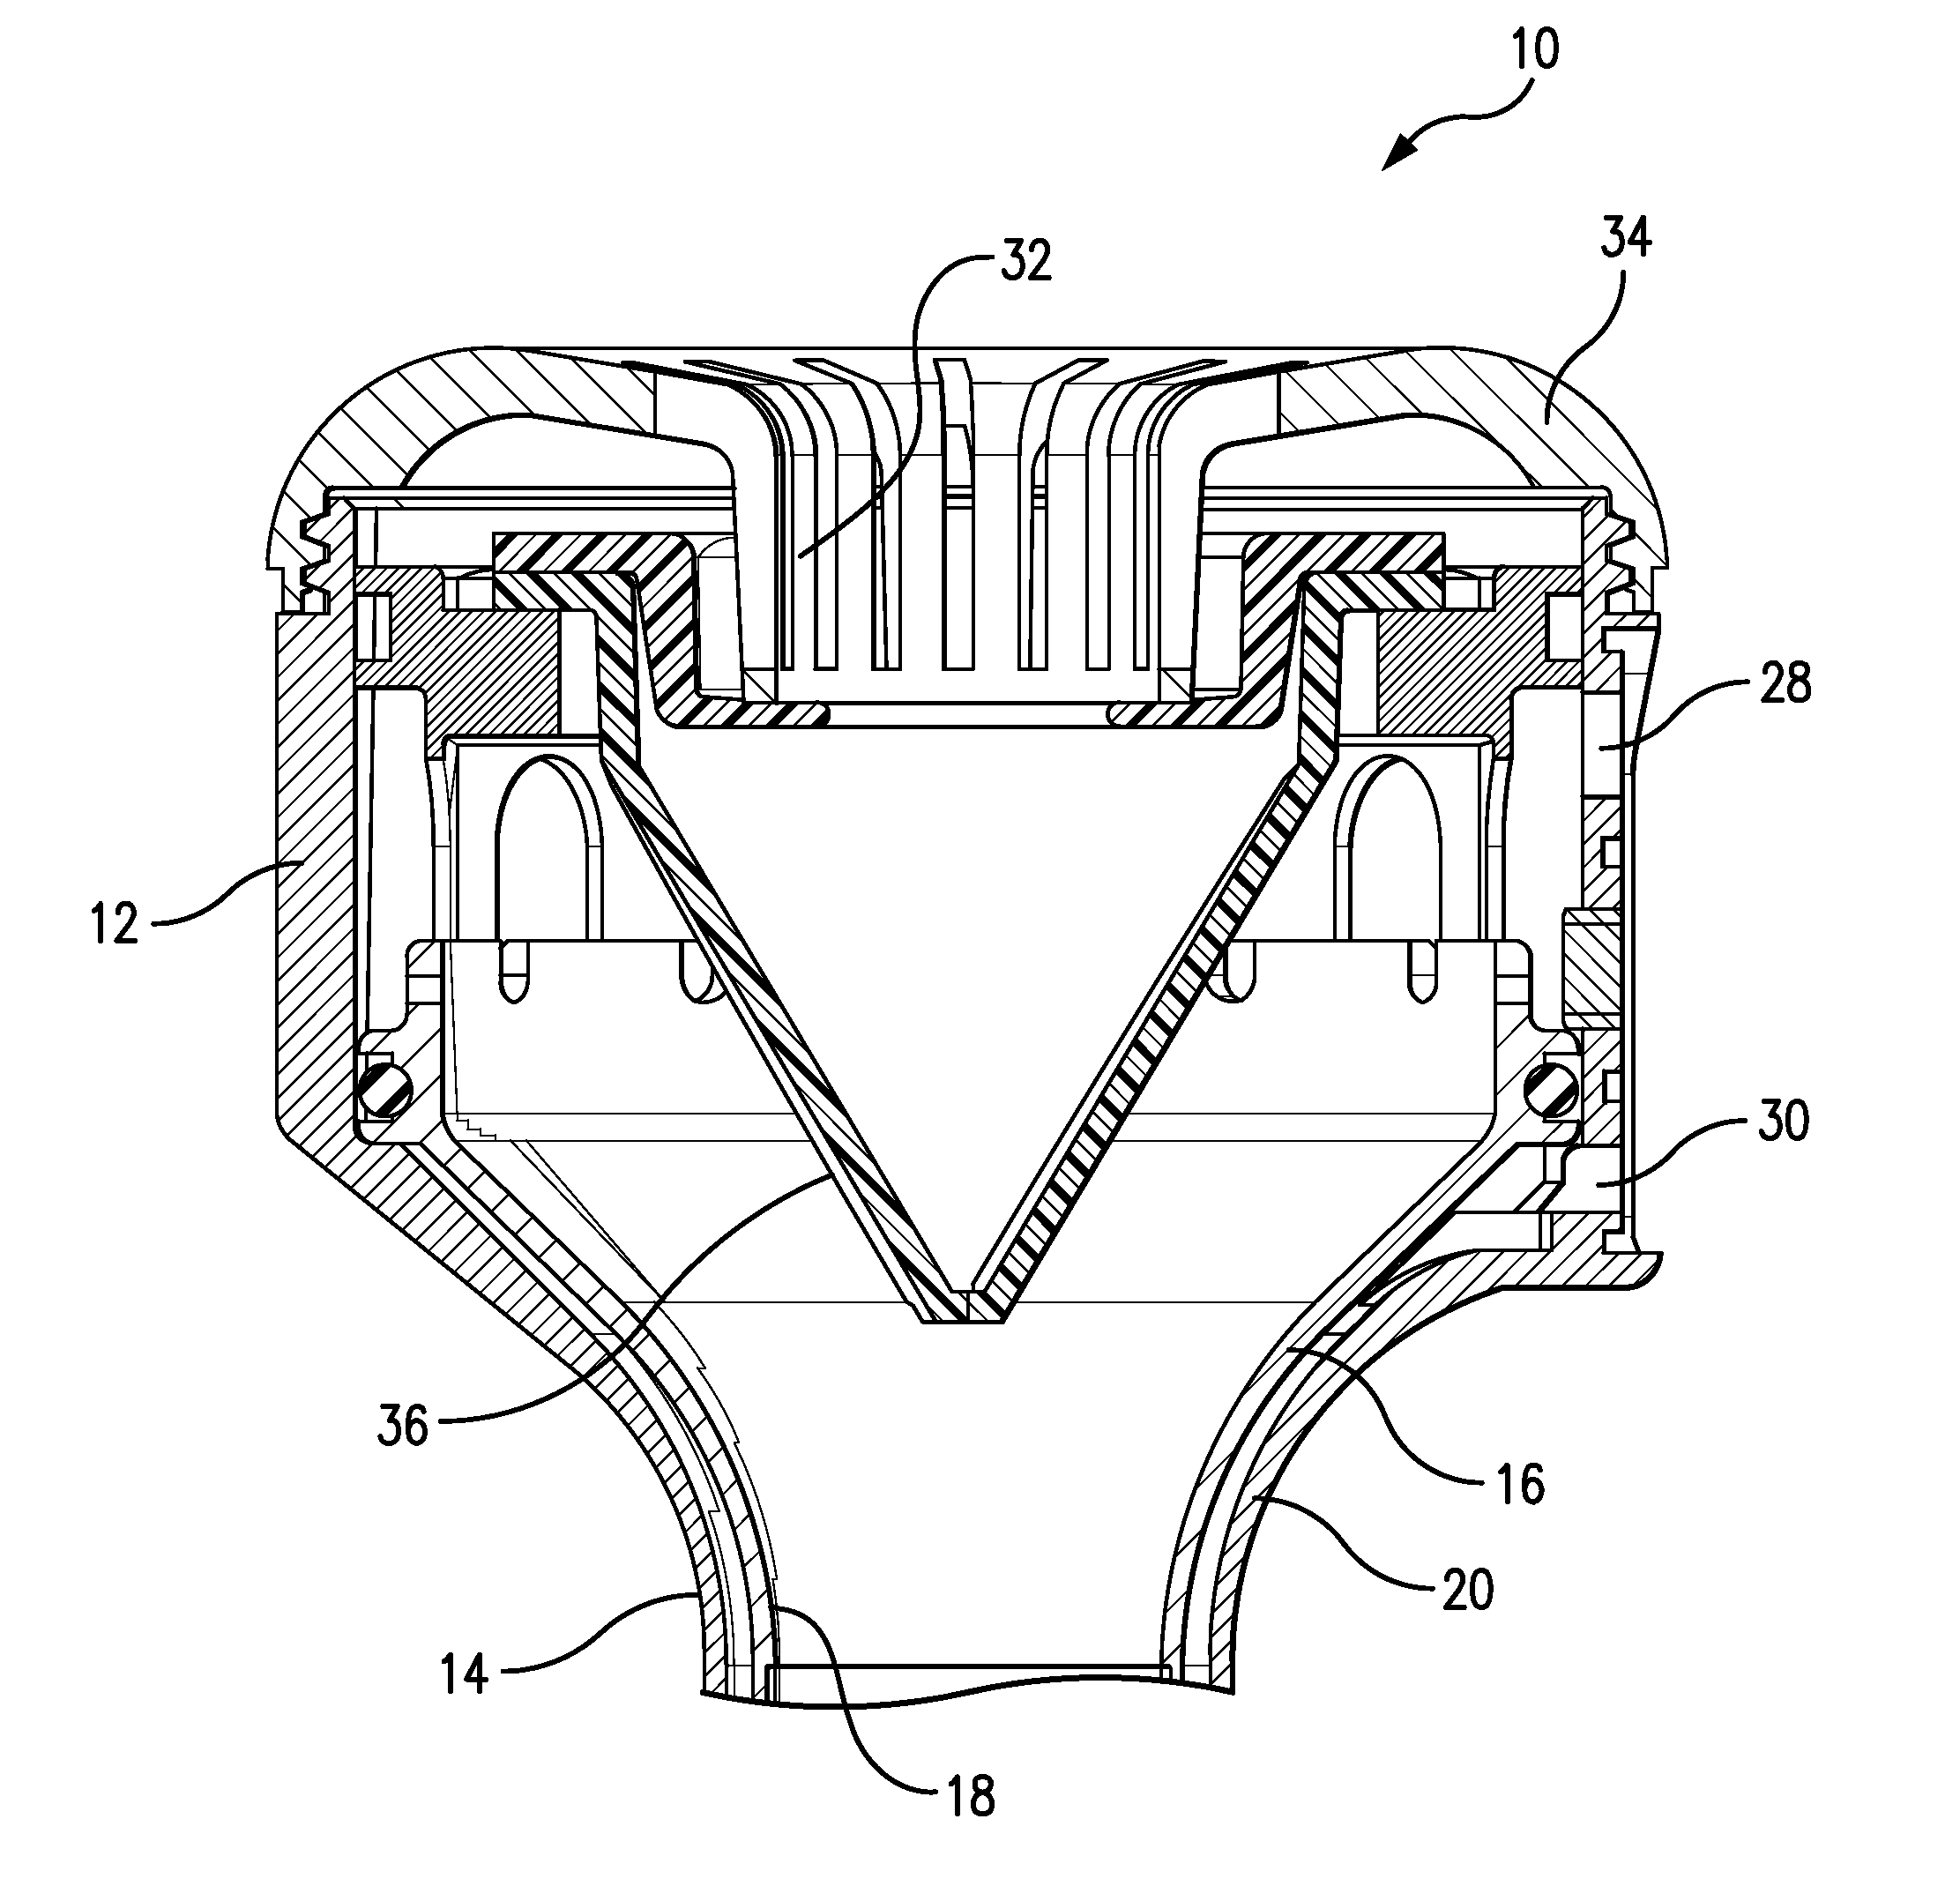 Systems and methods for conducting smoke evacuation during laparoscopic surgical procedures